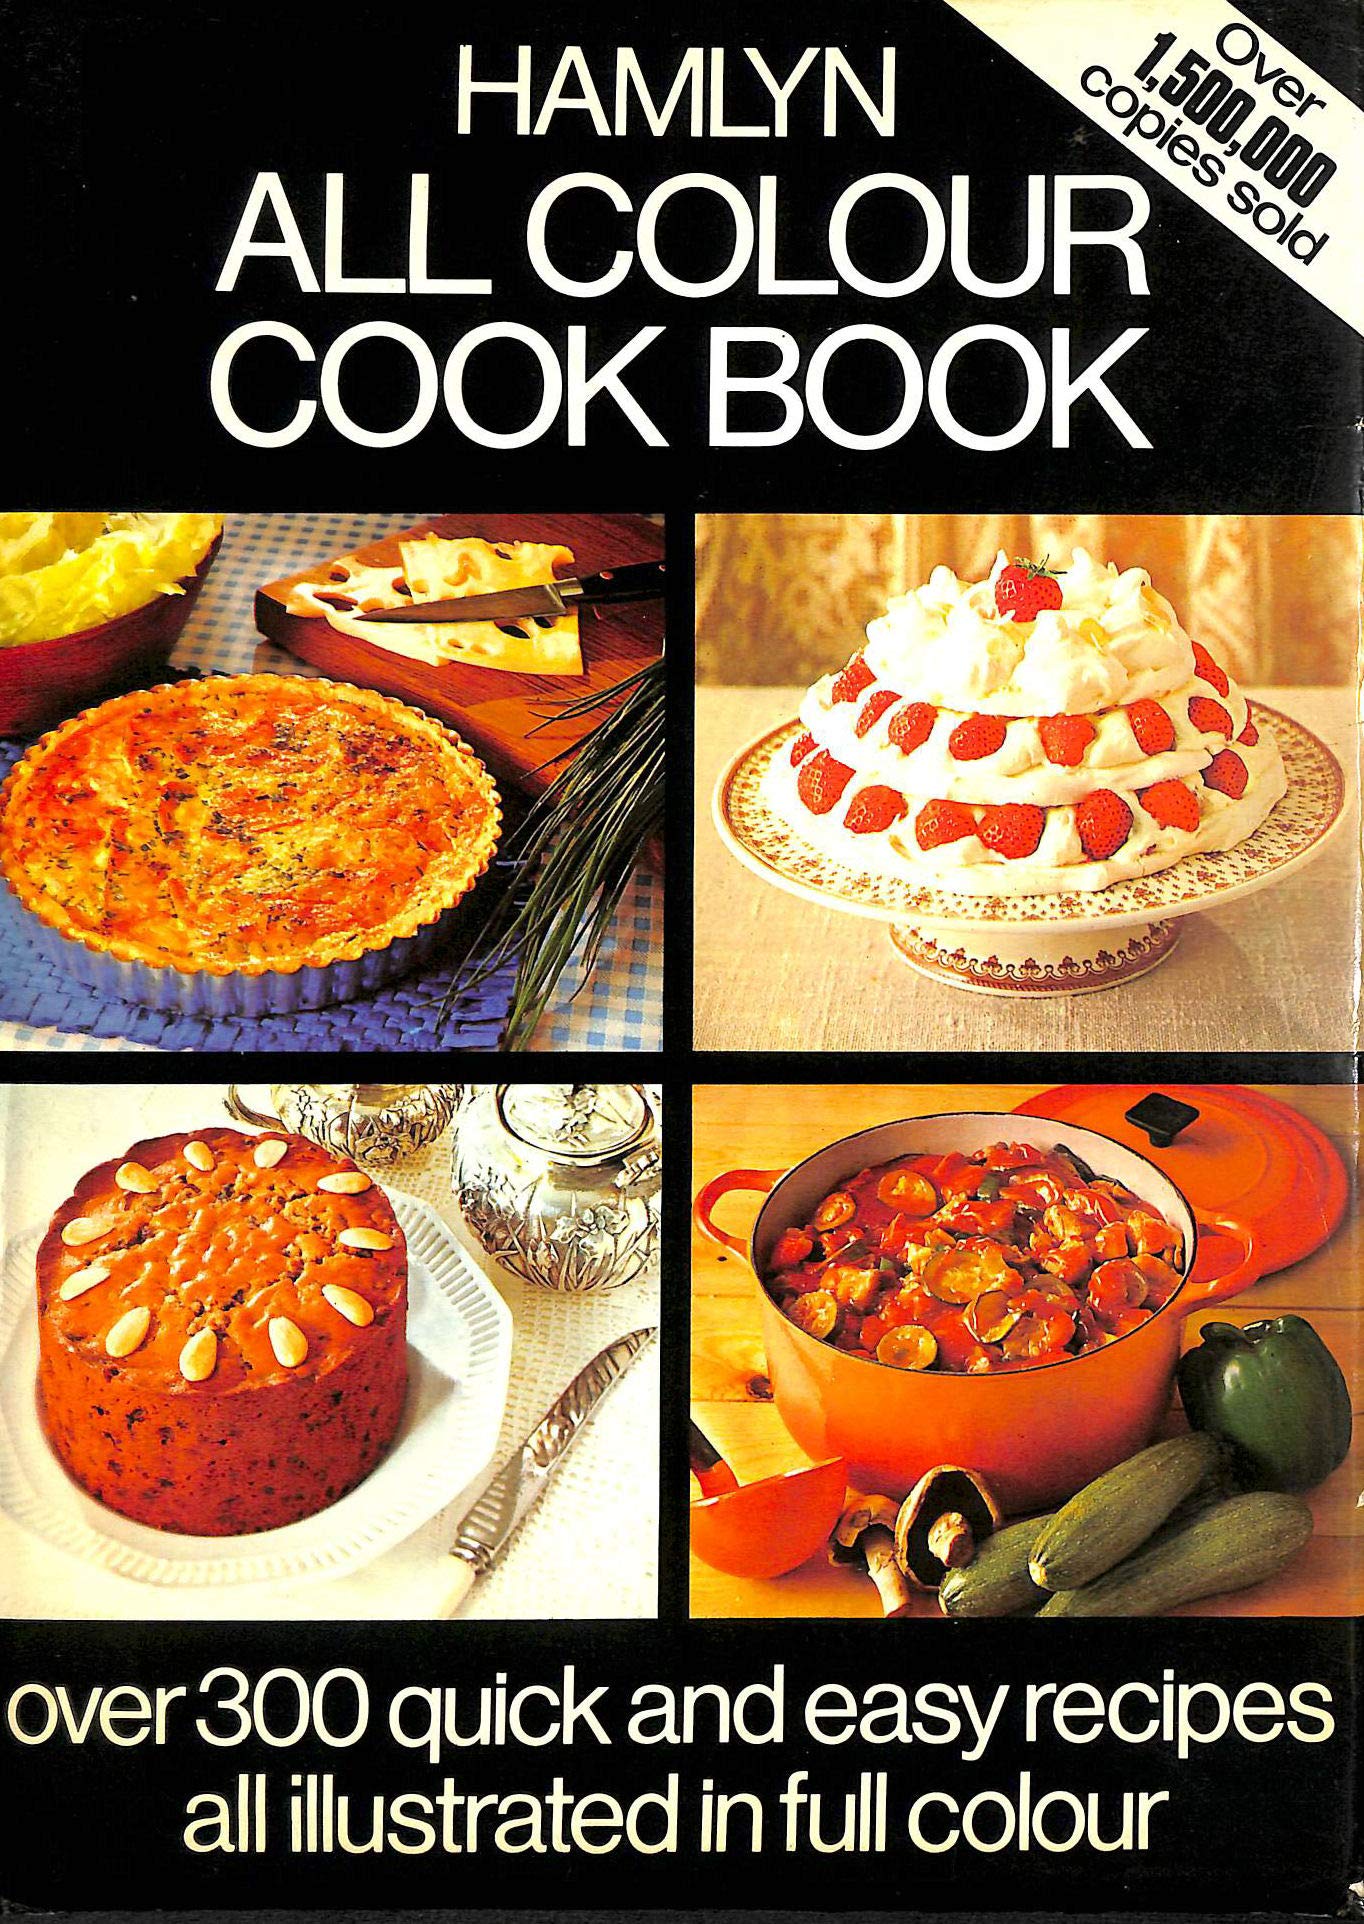 The front cover of Mary Berry's first cookbook